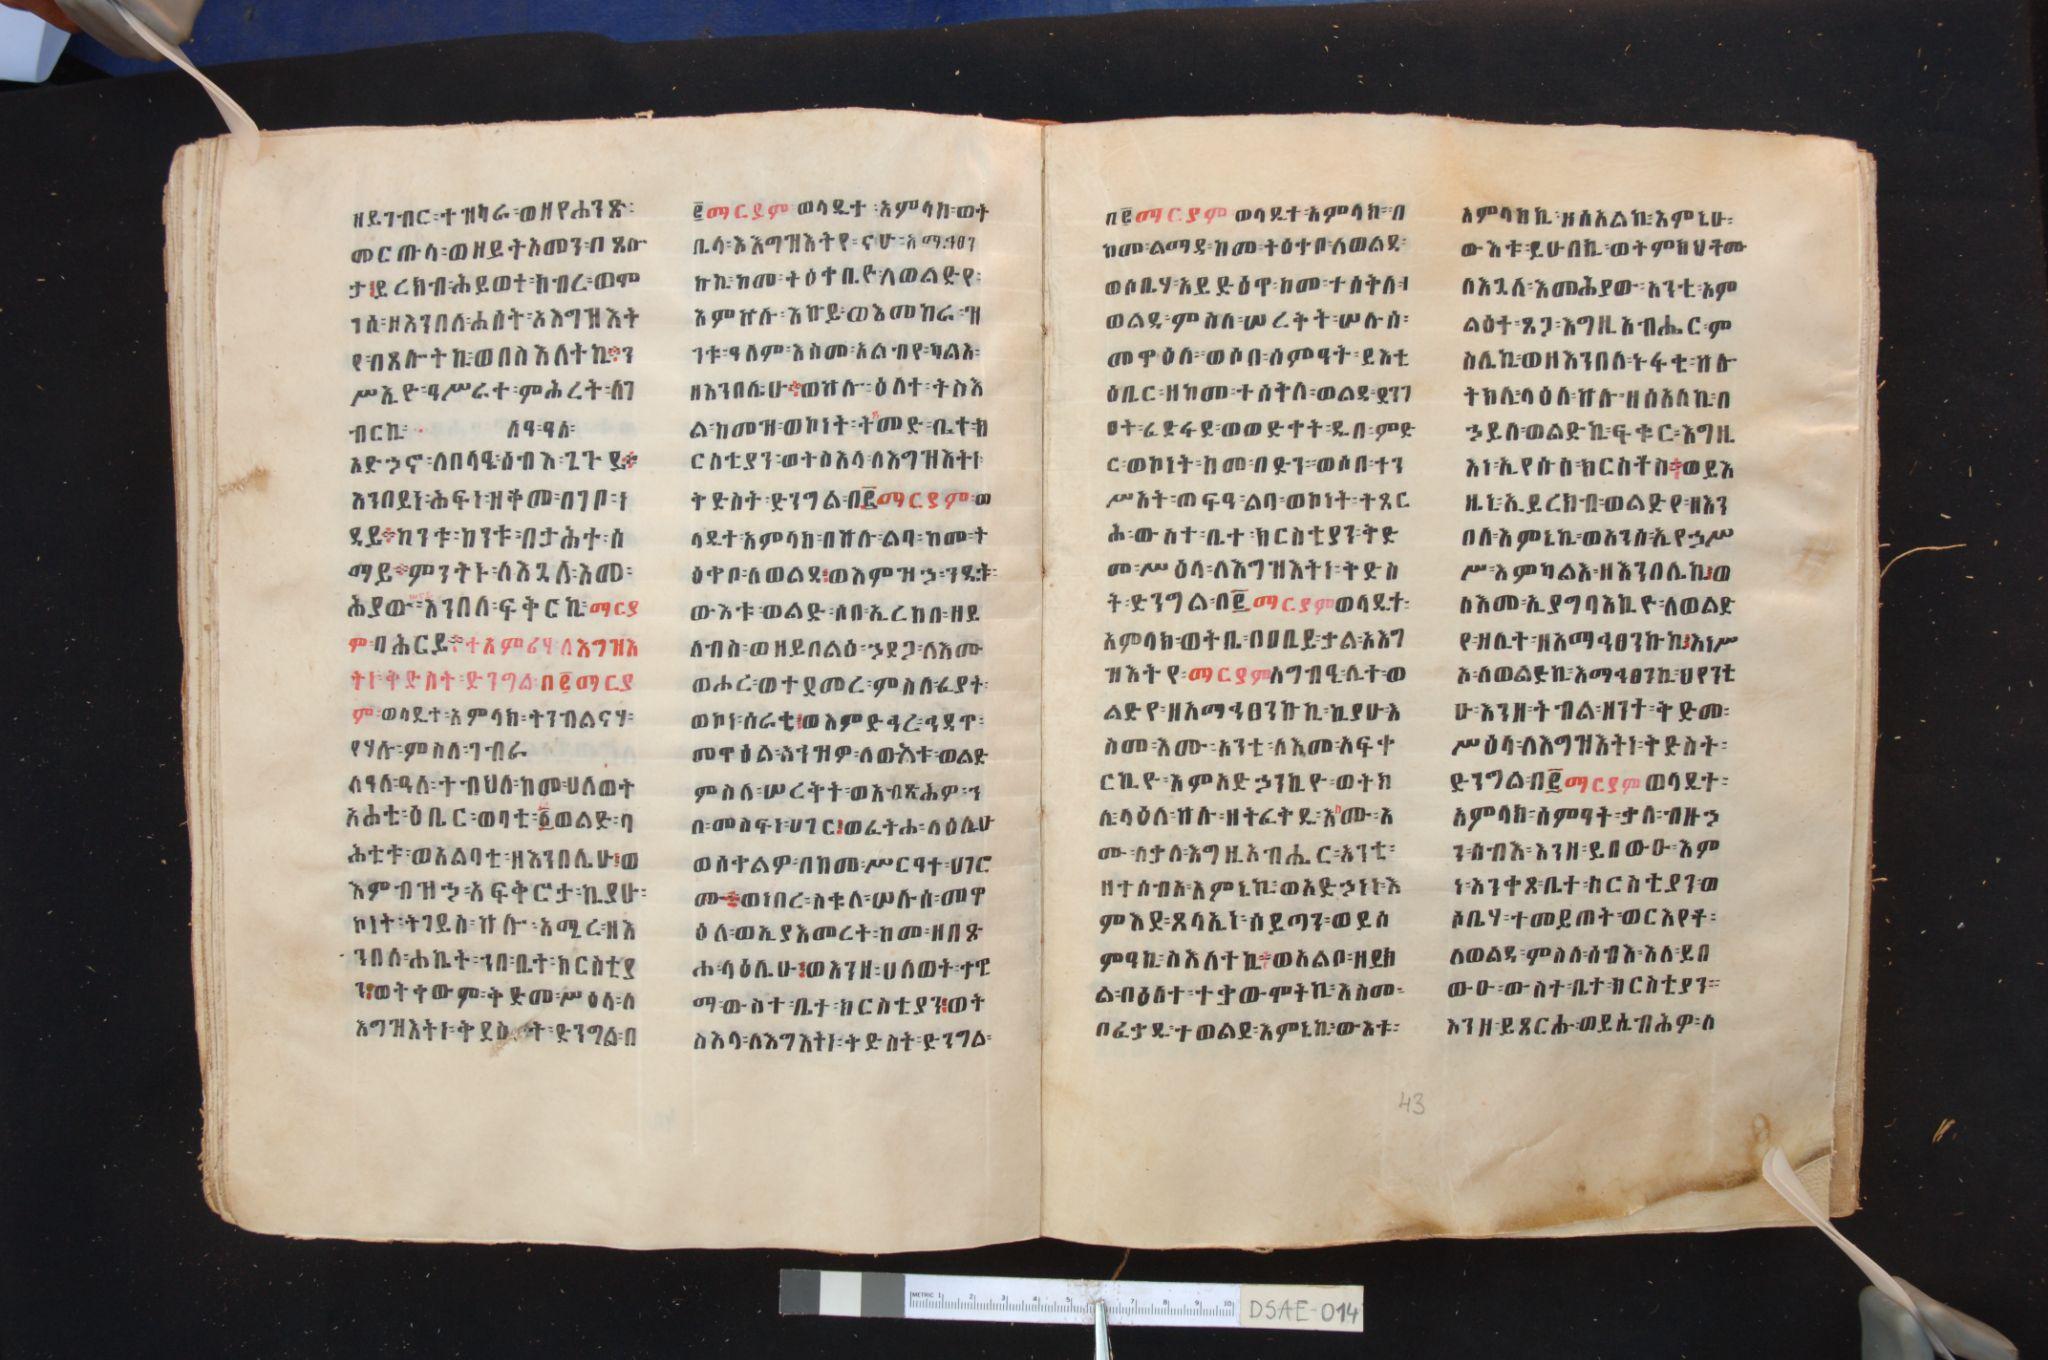 Scan of a manuscript. The text is written in Amharic and includes both
						black and red font.